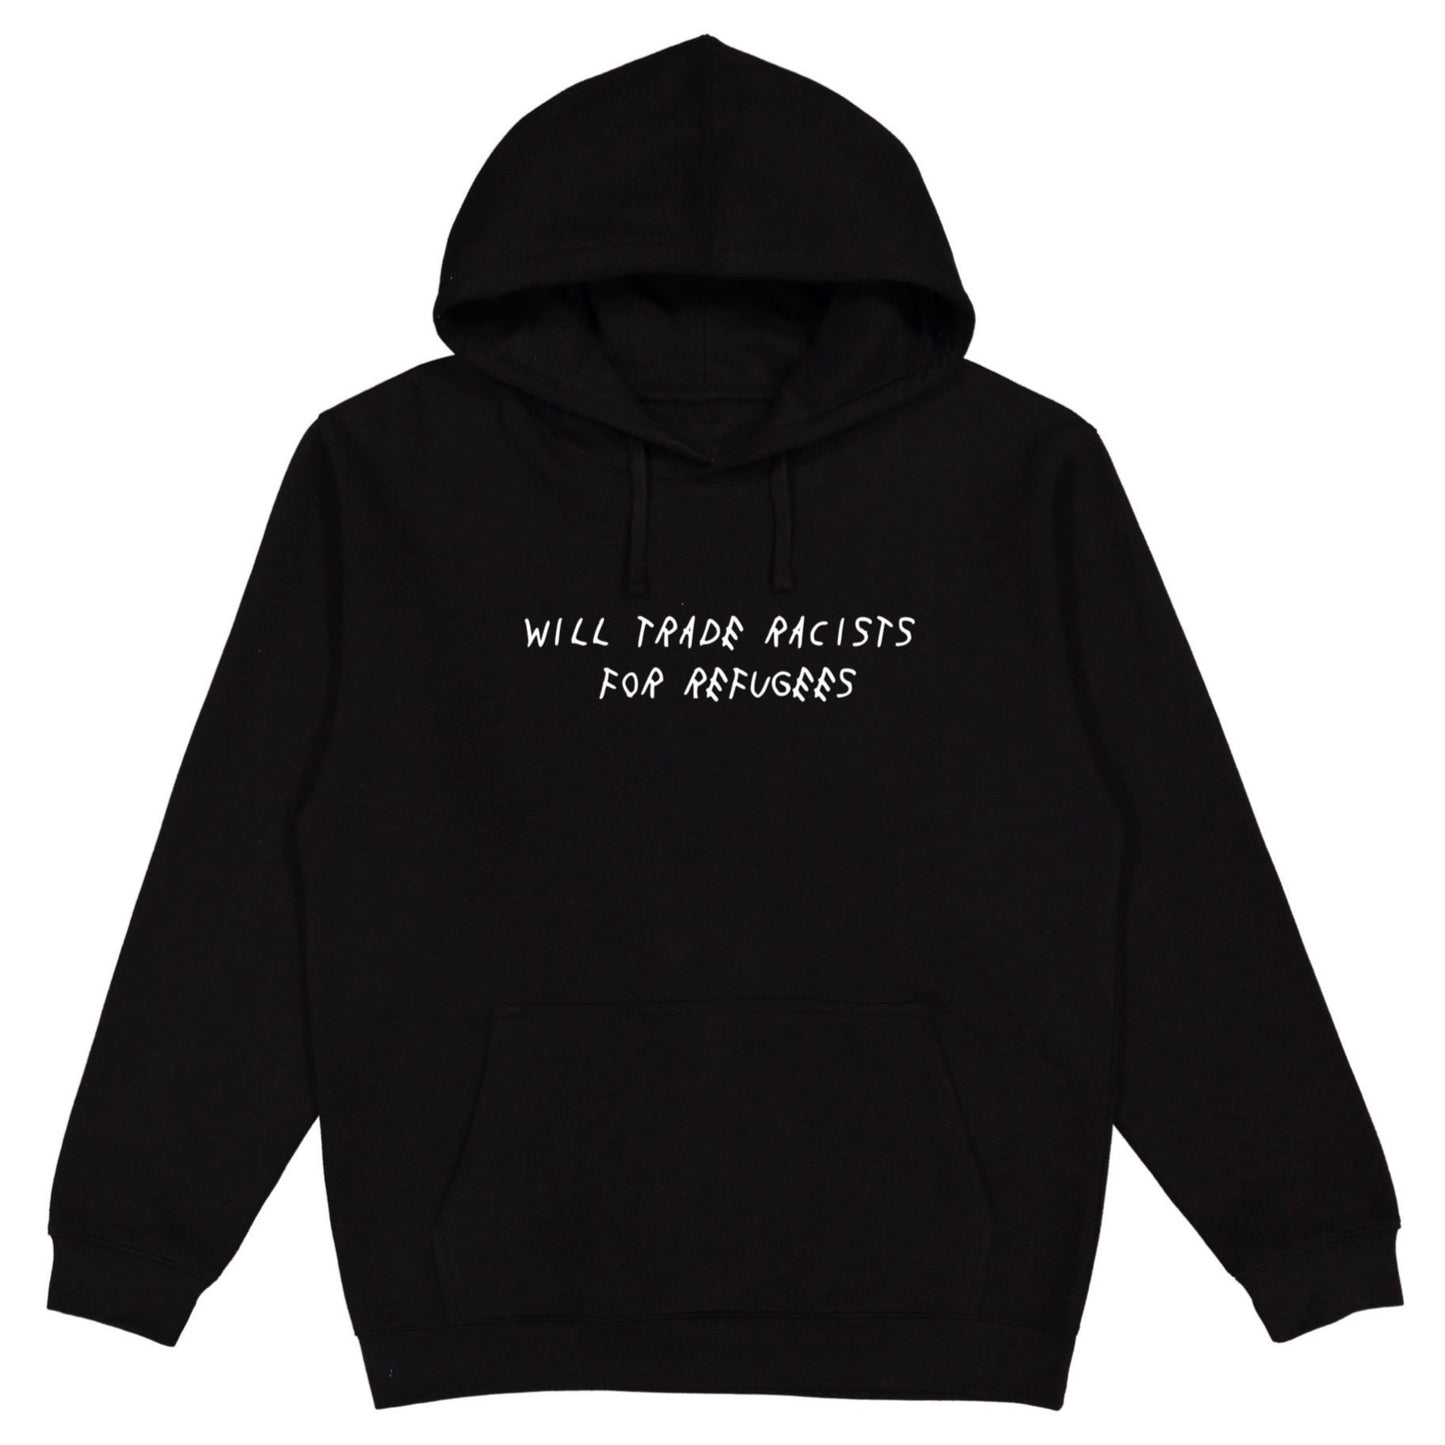 Trade Racists For Refugees Hoodie